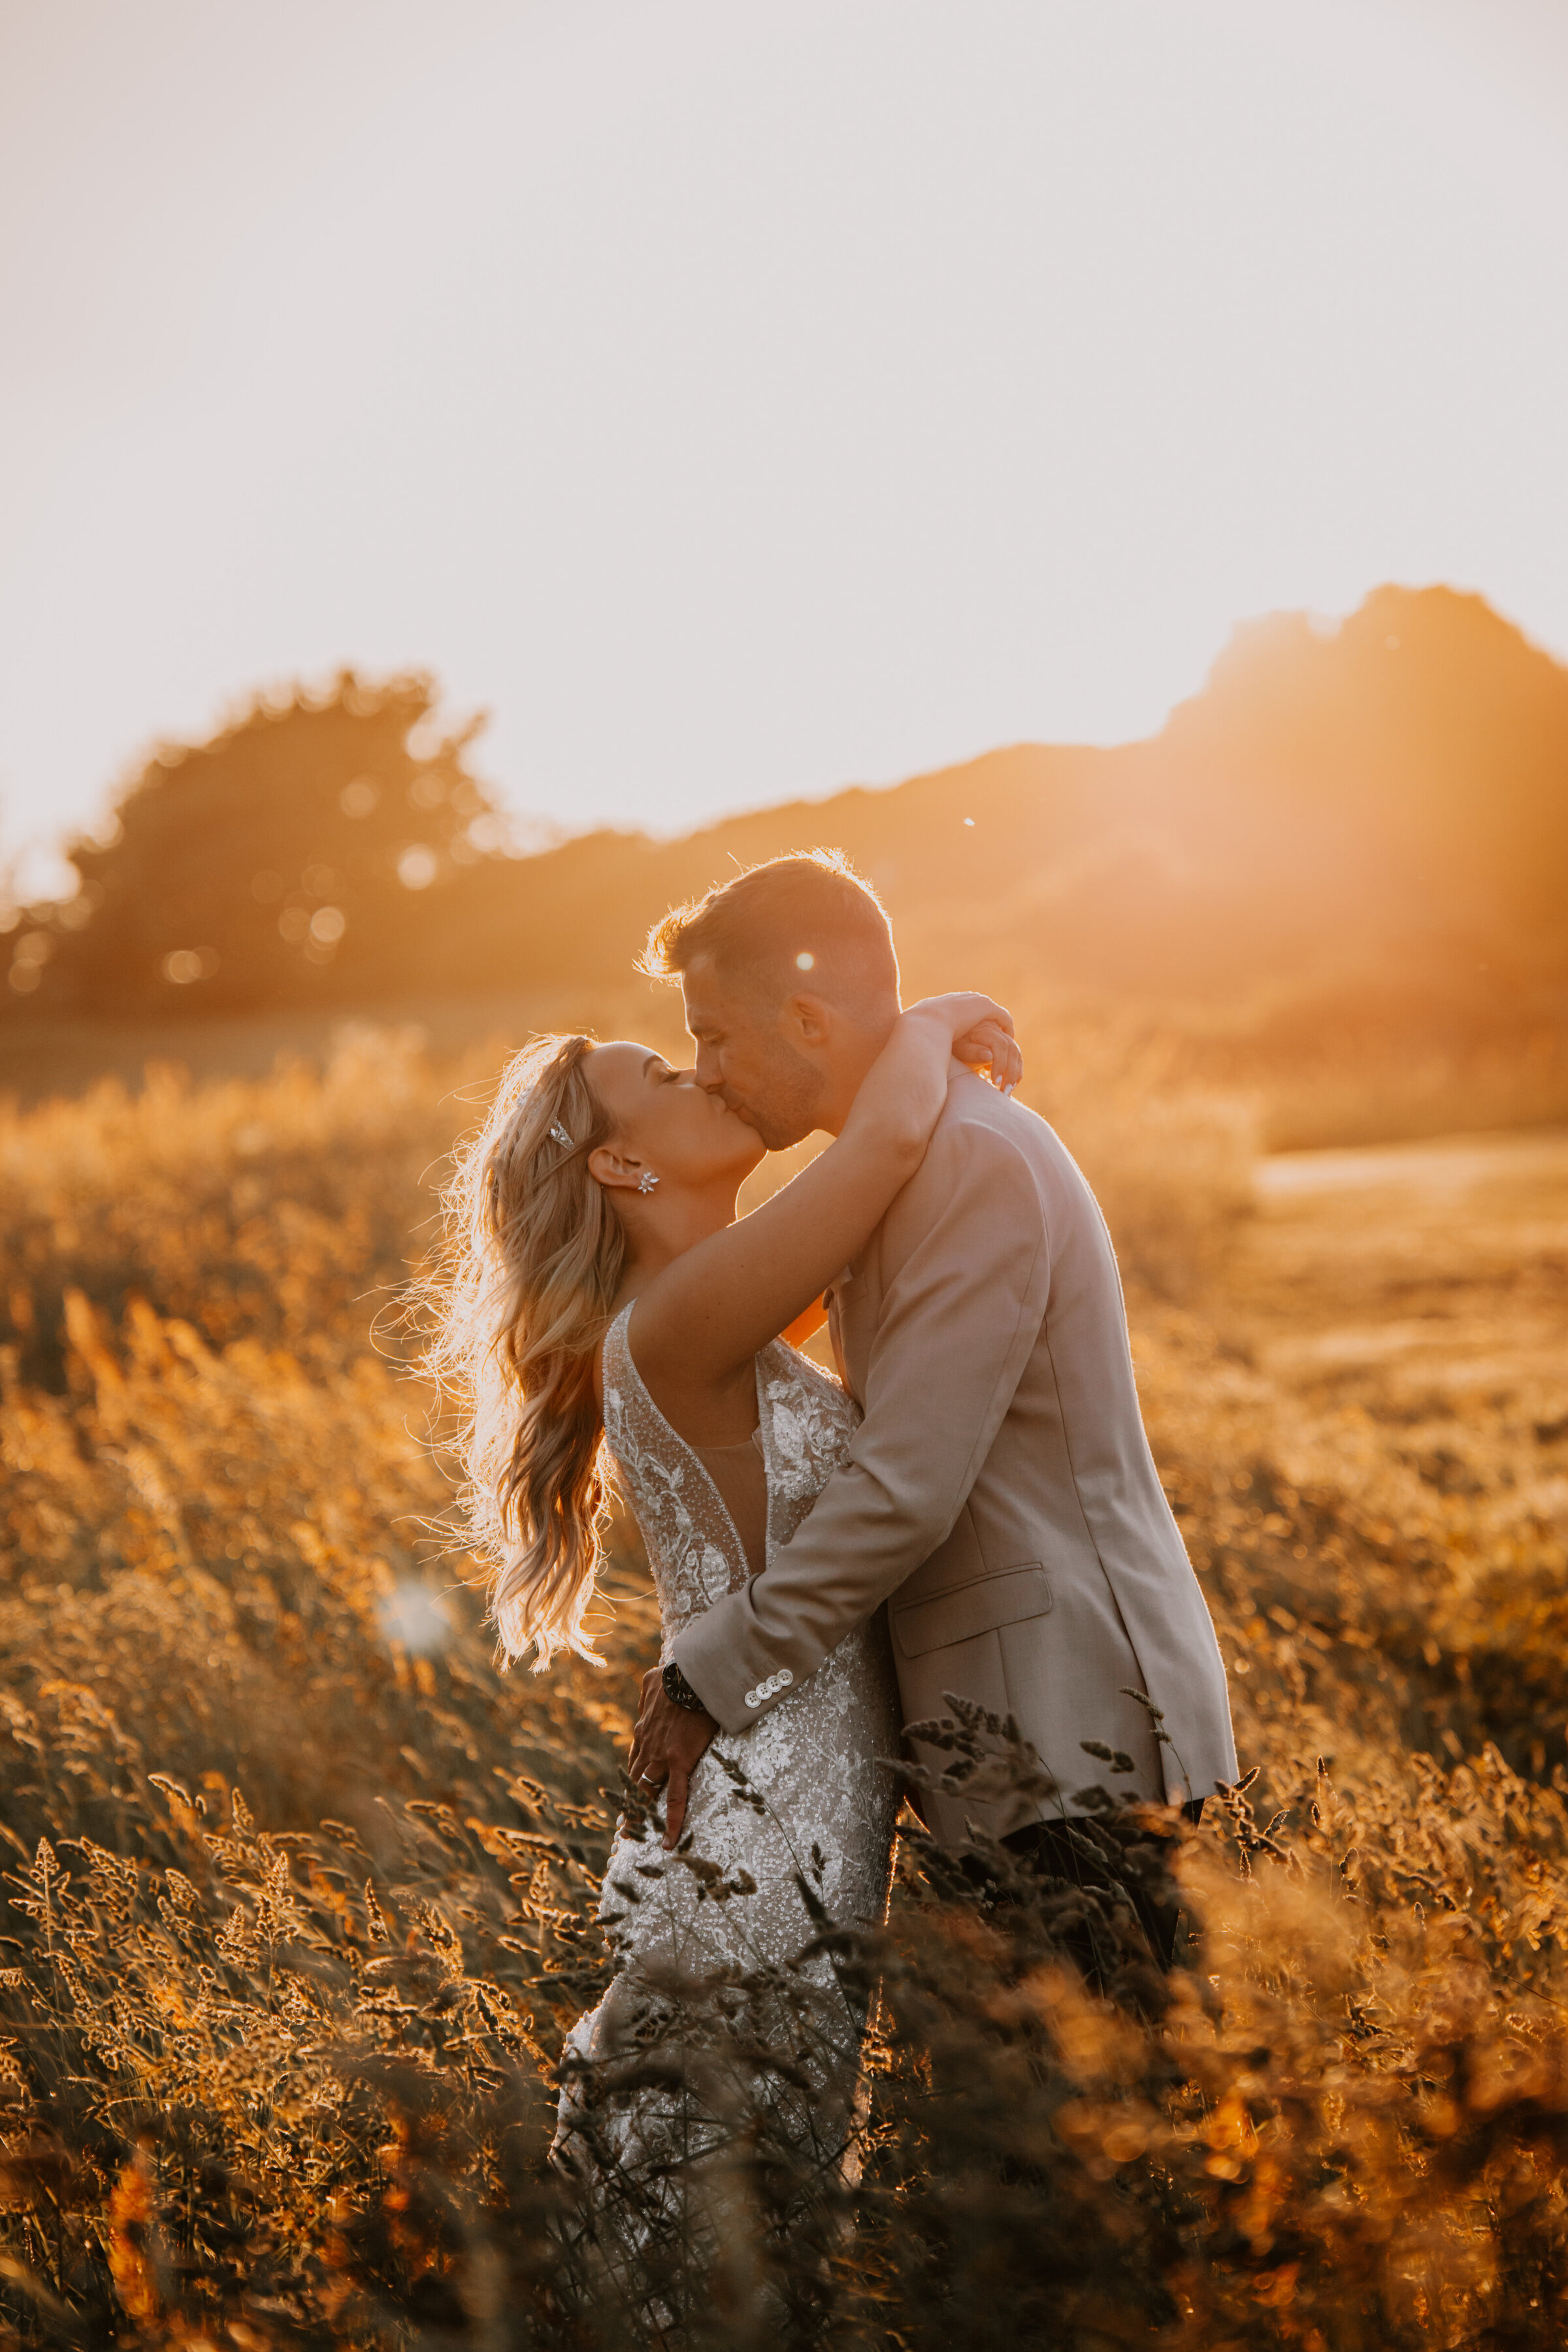 couple embracing during sunset in field